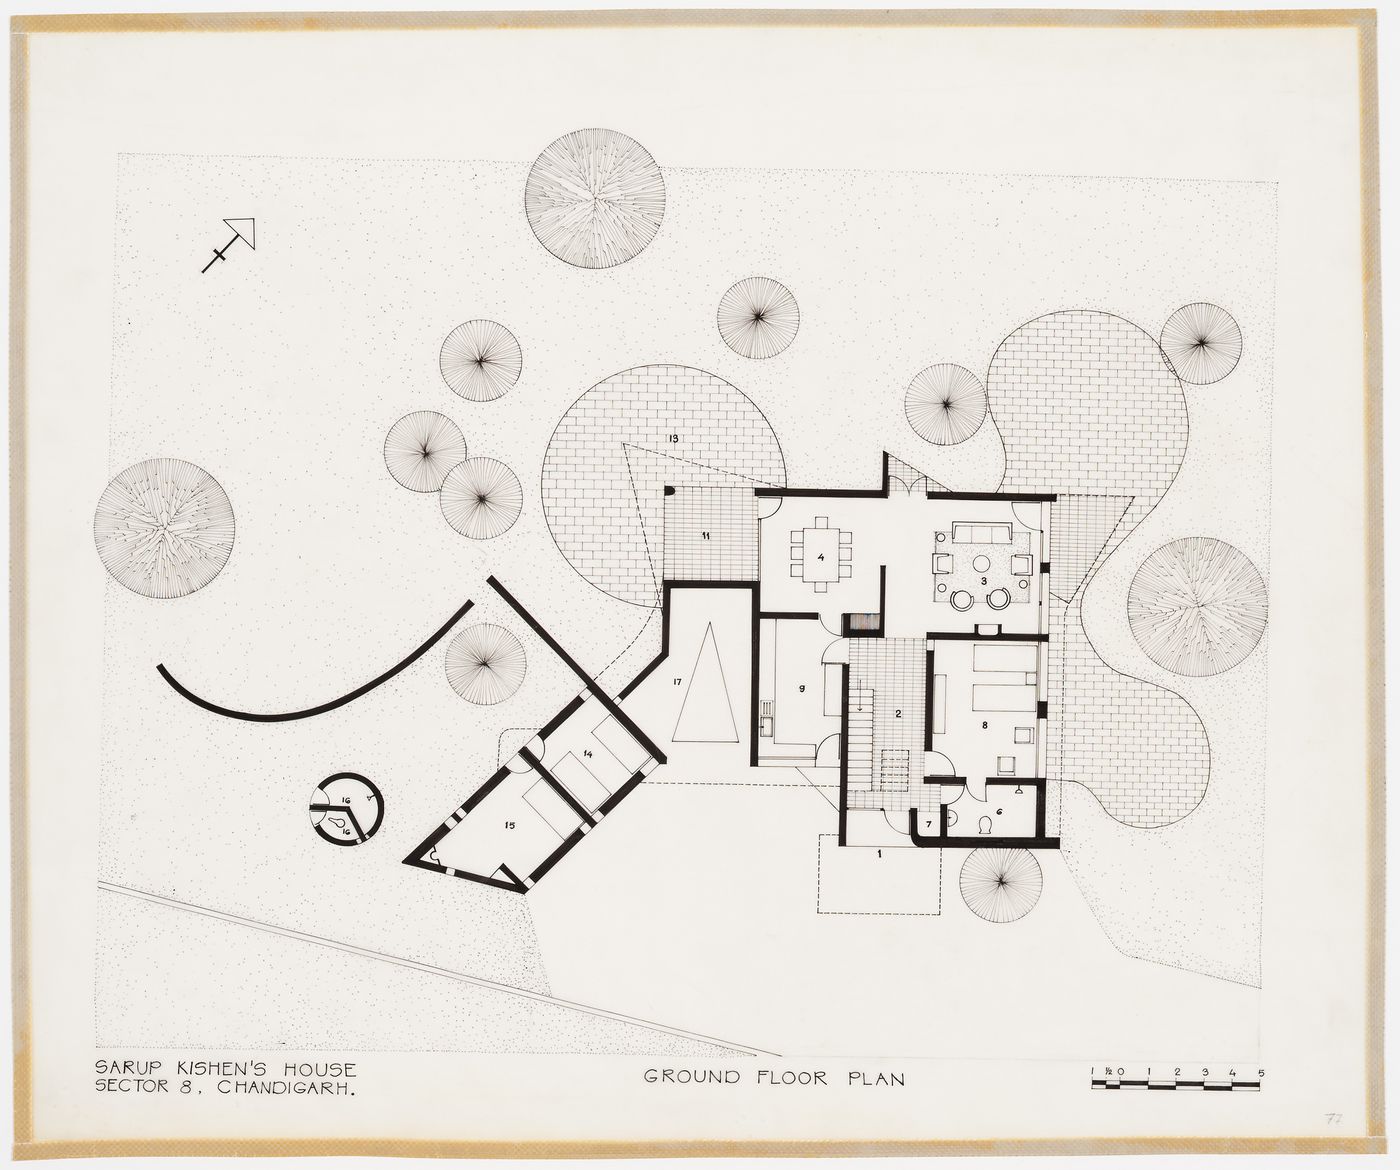 Ground floor plan for Sarup Kishen's house, Sector 8, Chandigarh, India